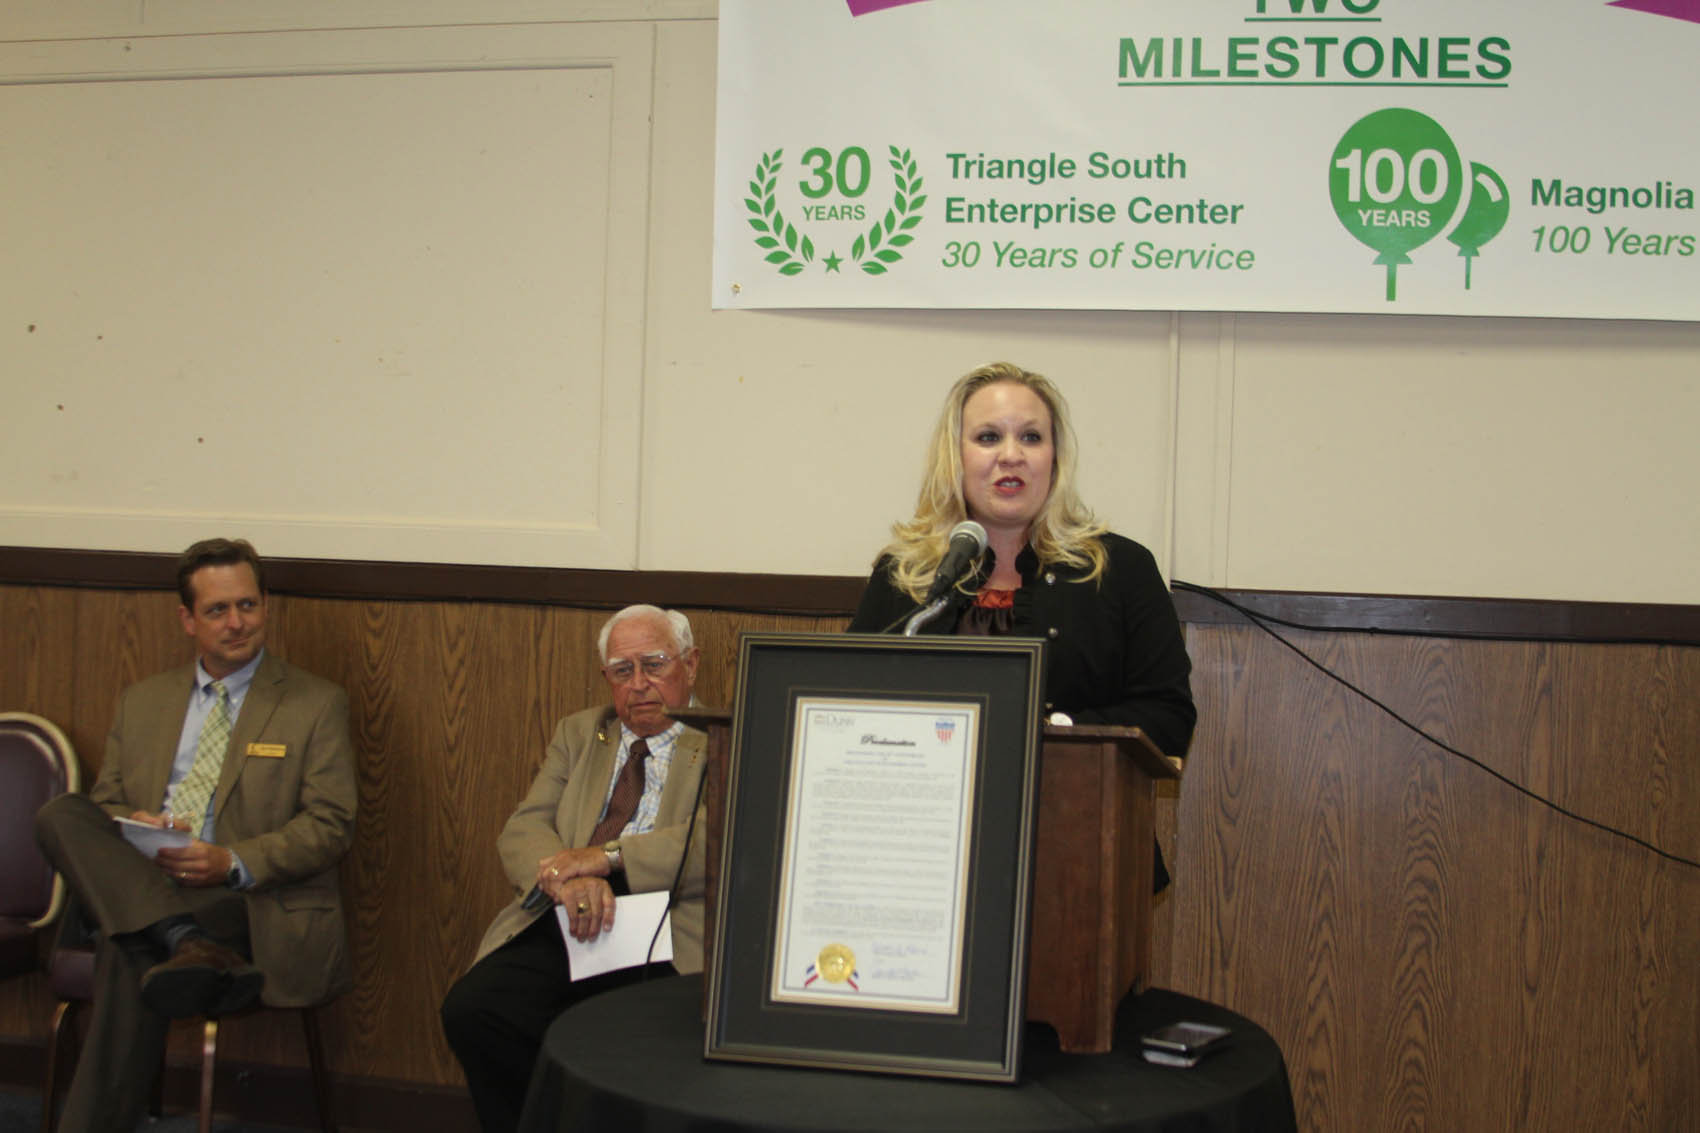 Read the full story, Triangle South celebrates two milestones